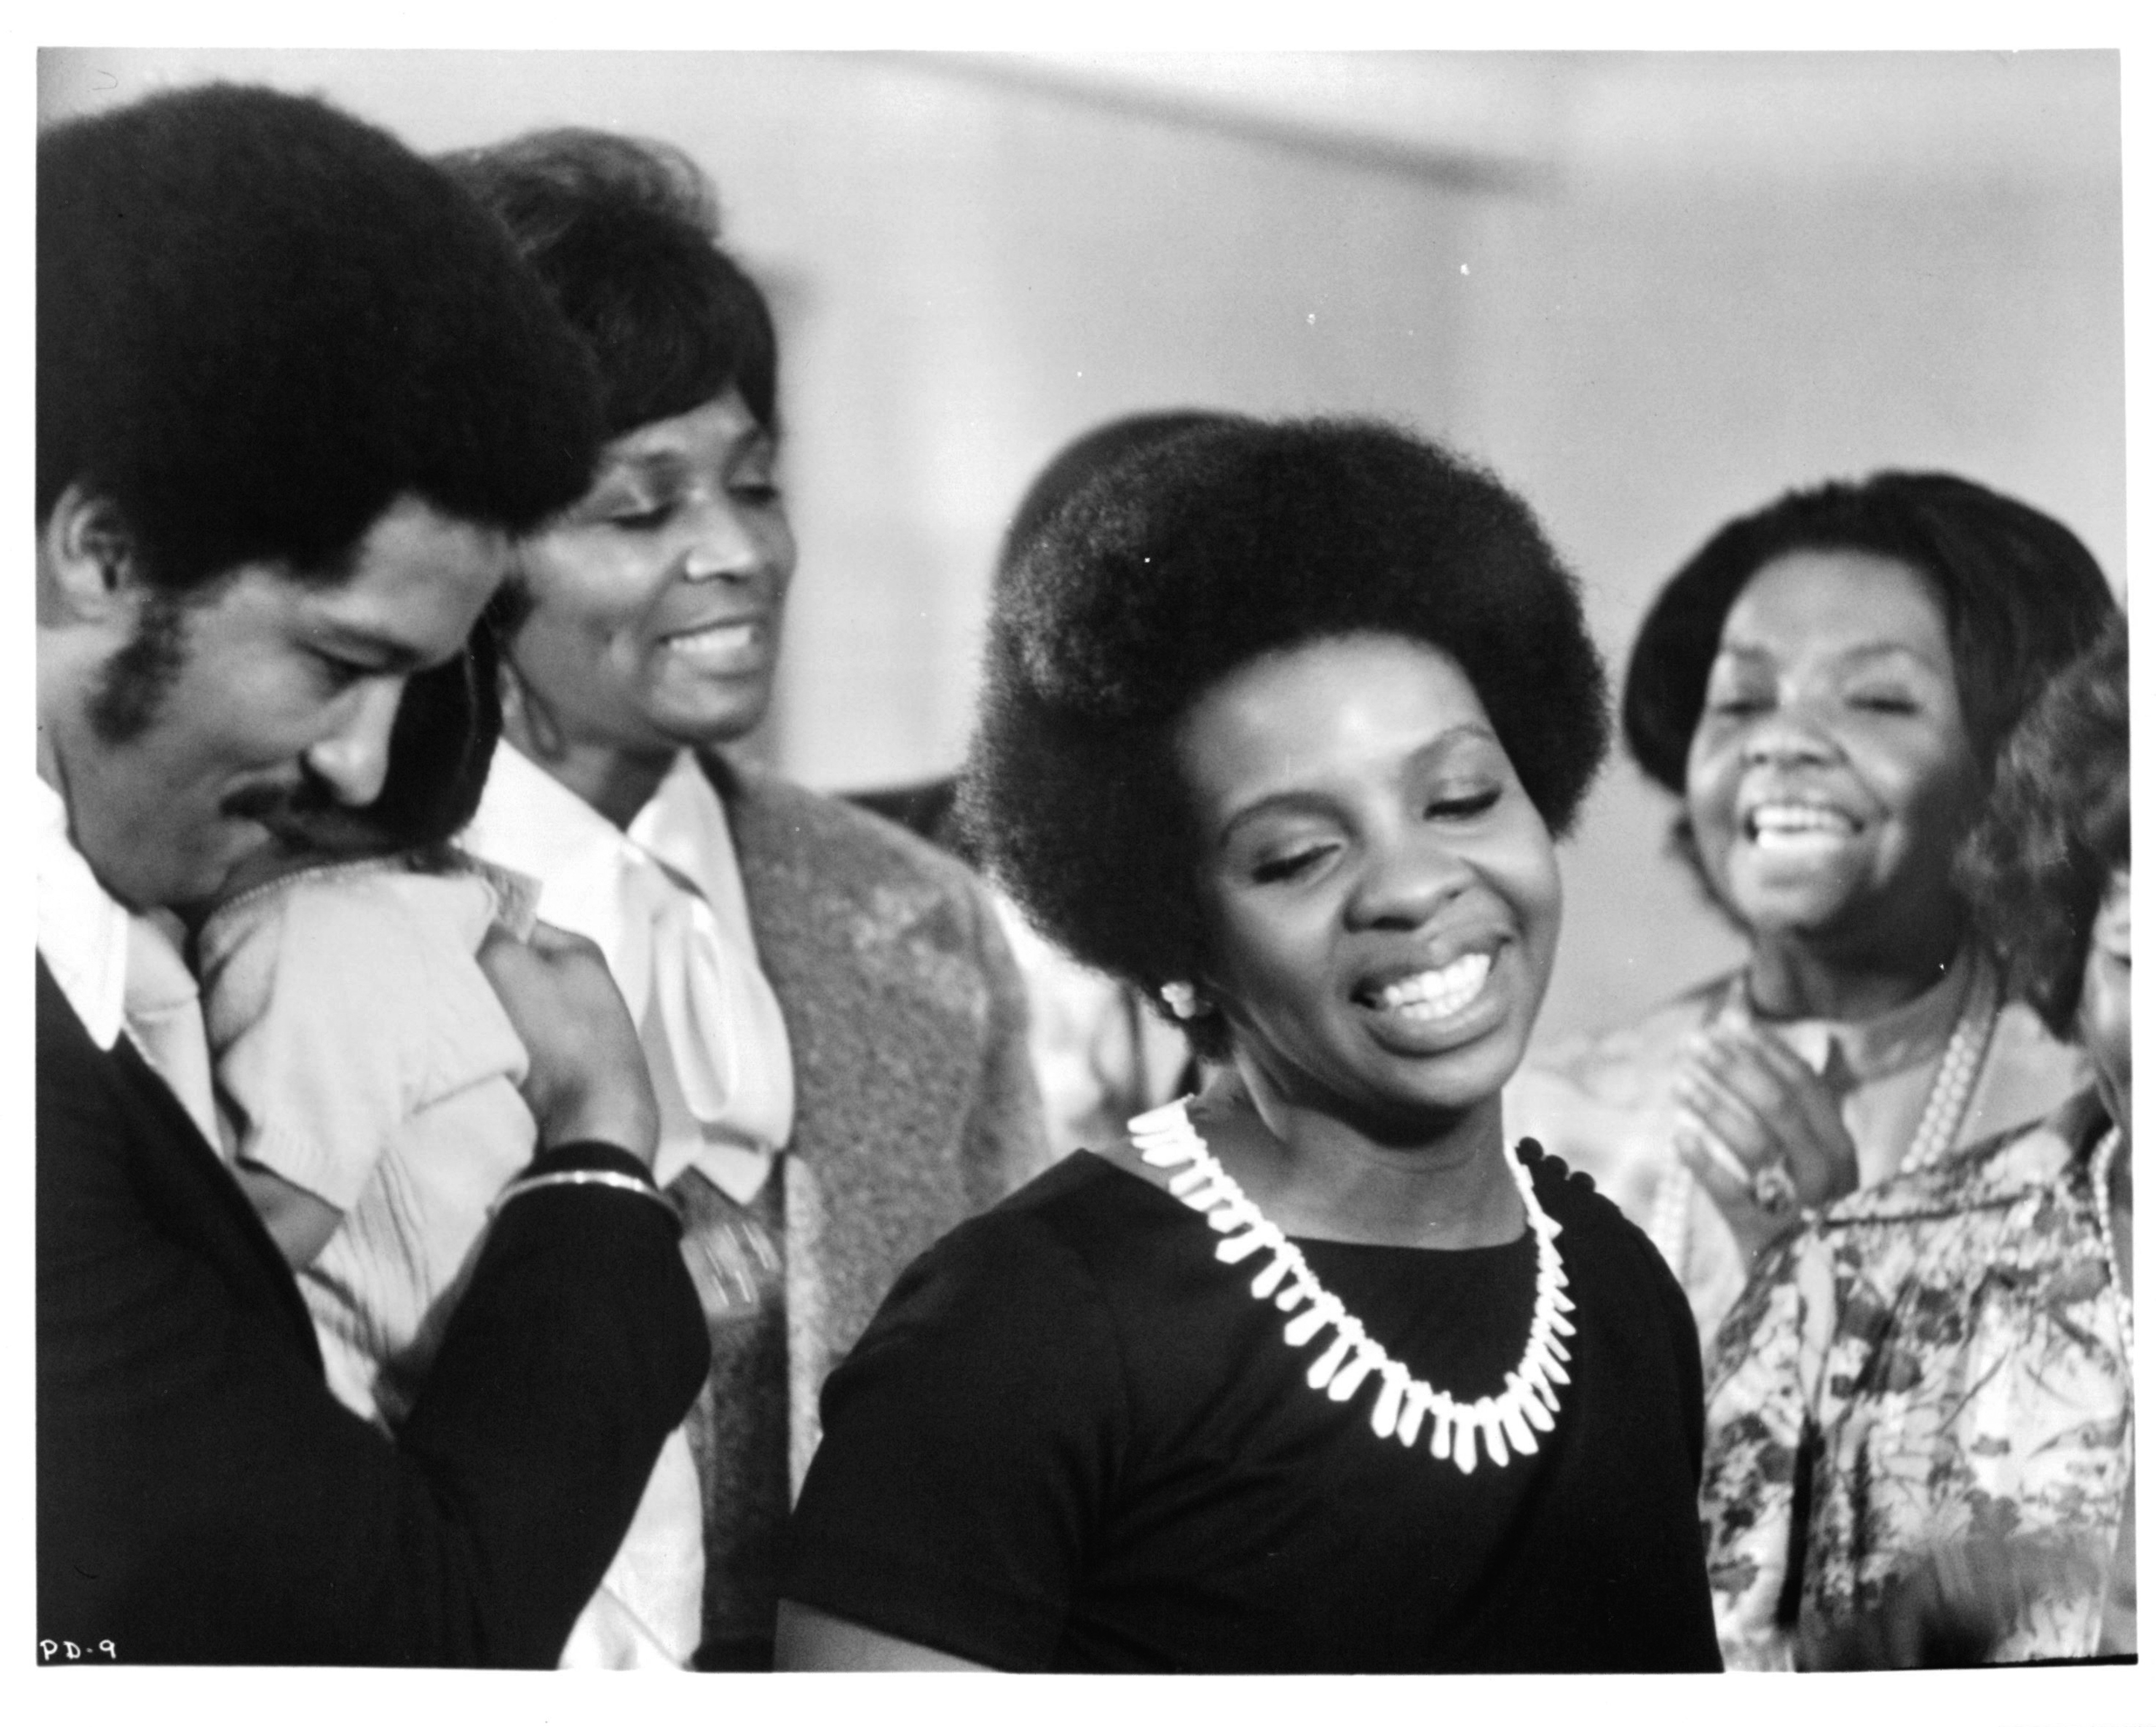 Barry Hankerson and Gladys Knight dance with friends in a scene from the film "Pipe Dreams," in 1976. | Source: Getty Images